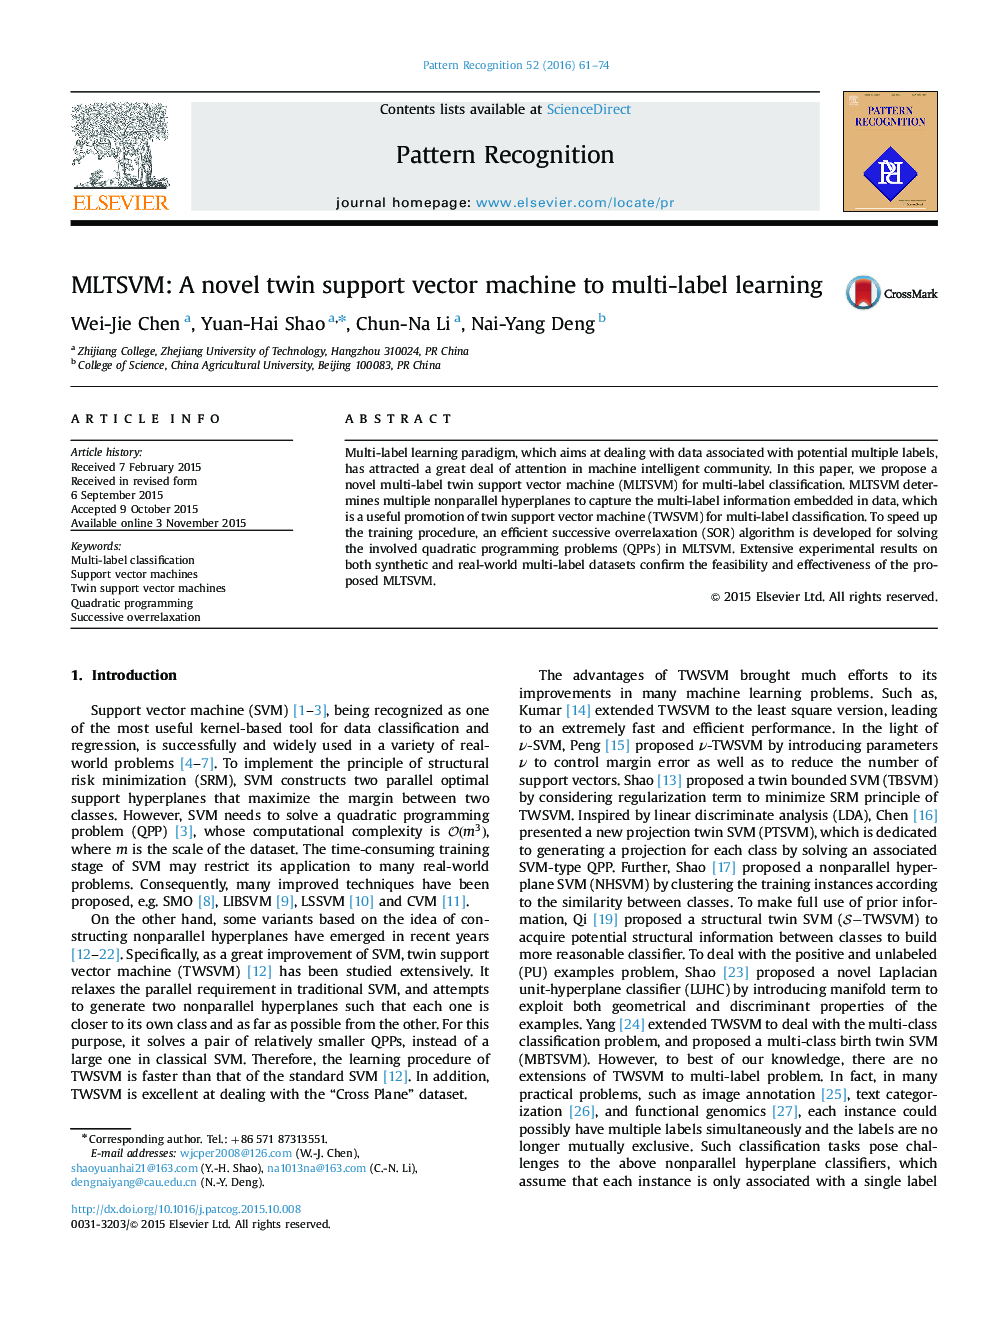 MLTSVM: A novel twin support vector machine to multi-label learning